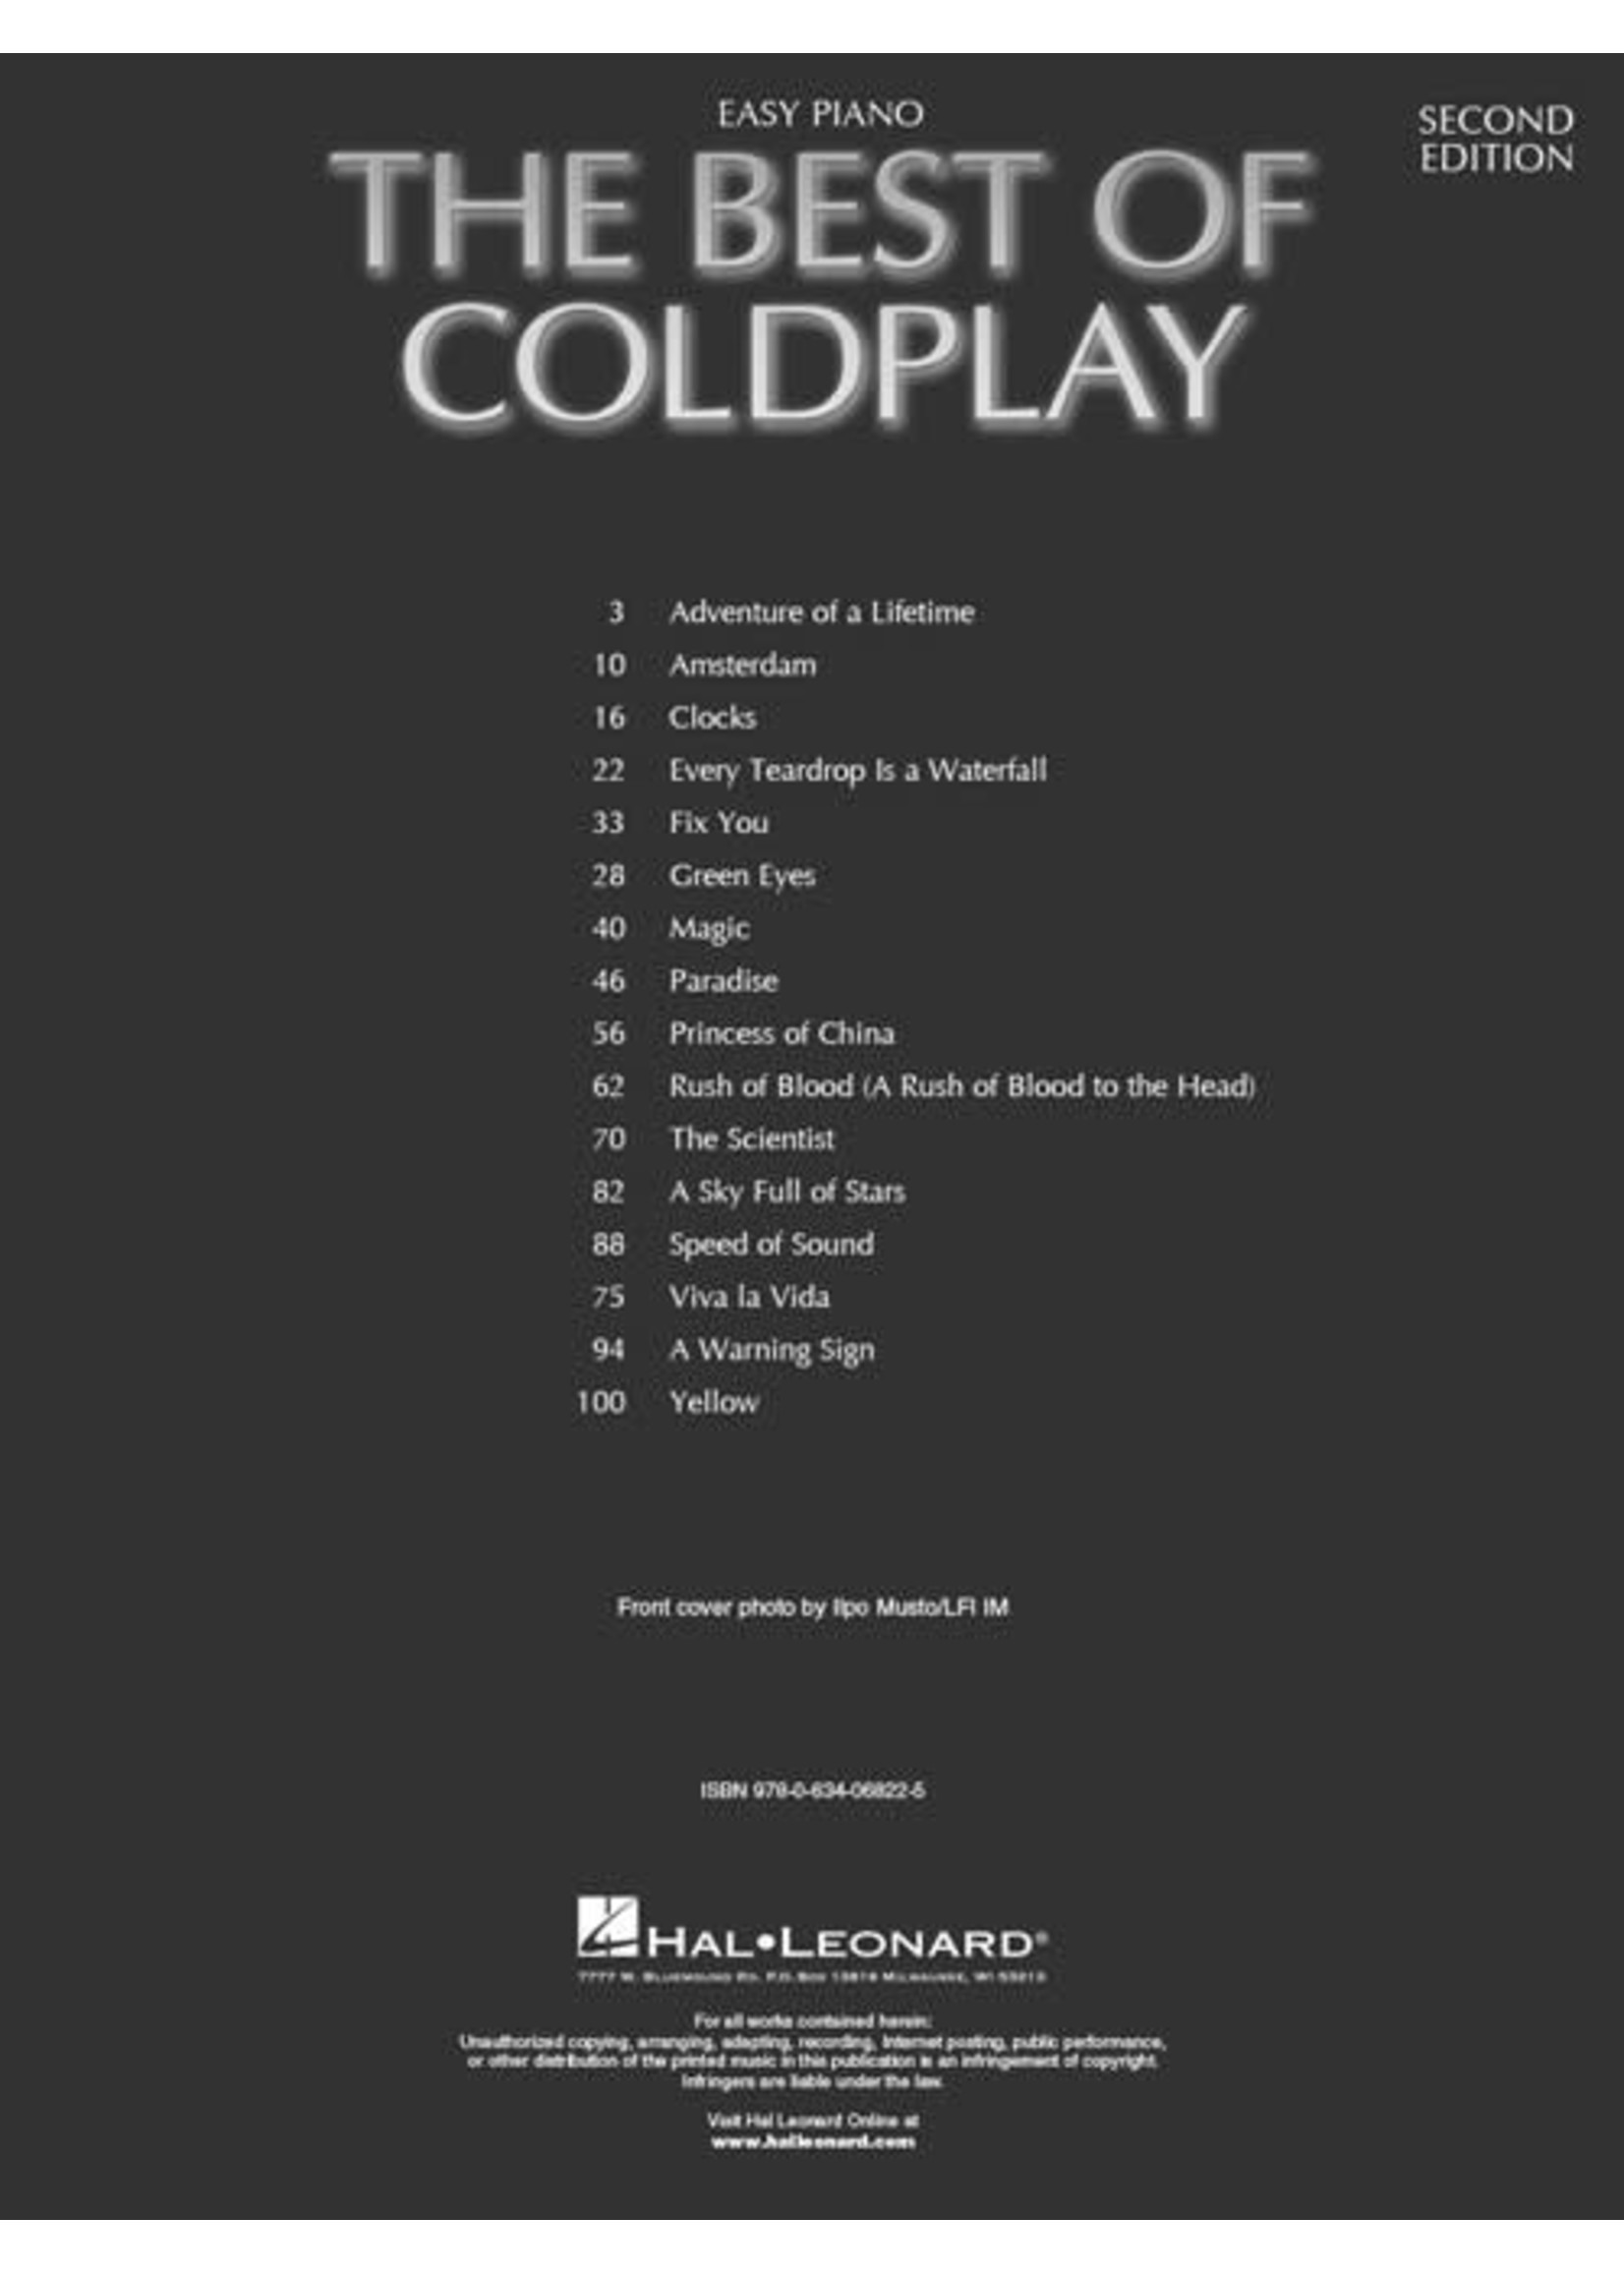 Hal Leonard The Best of Coldplay EP (2nd Edition)